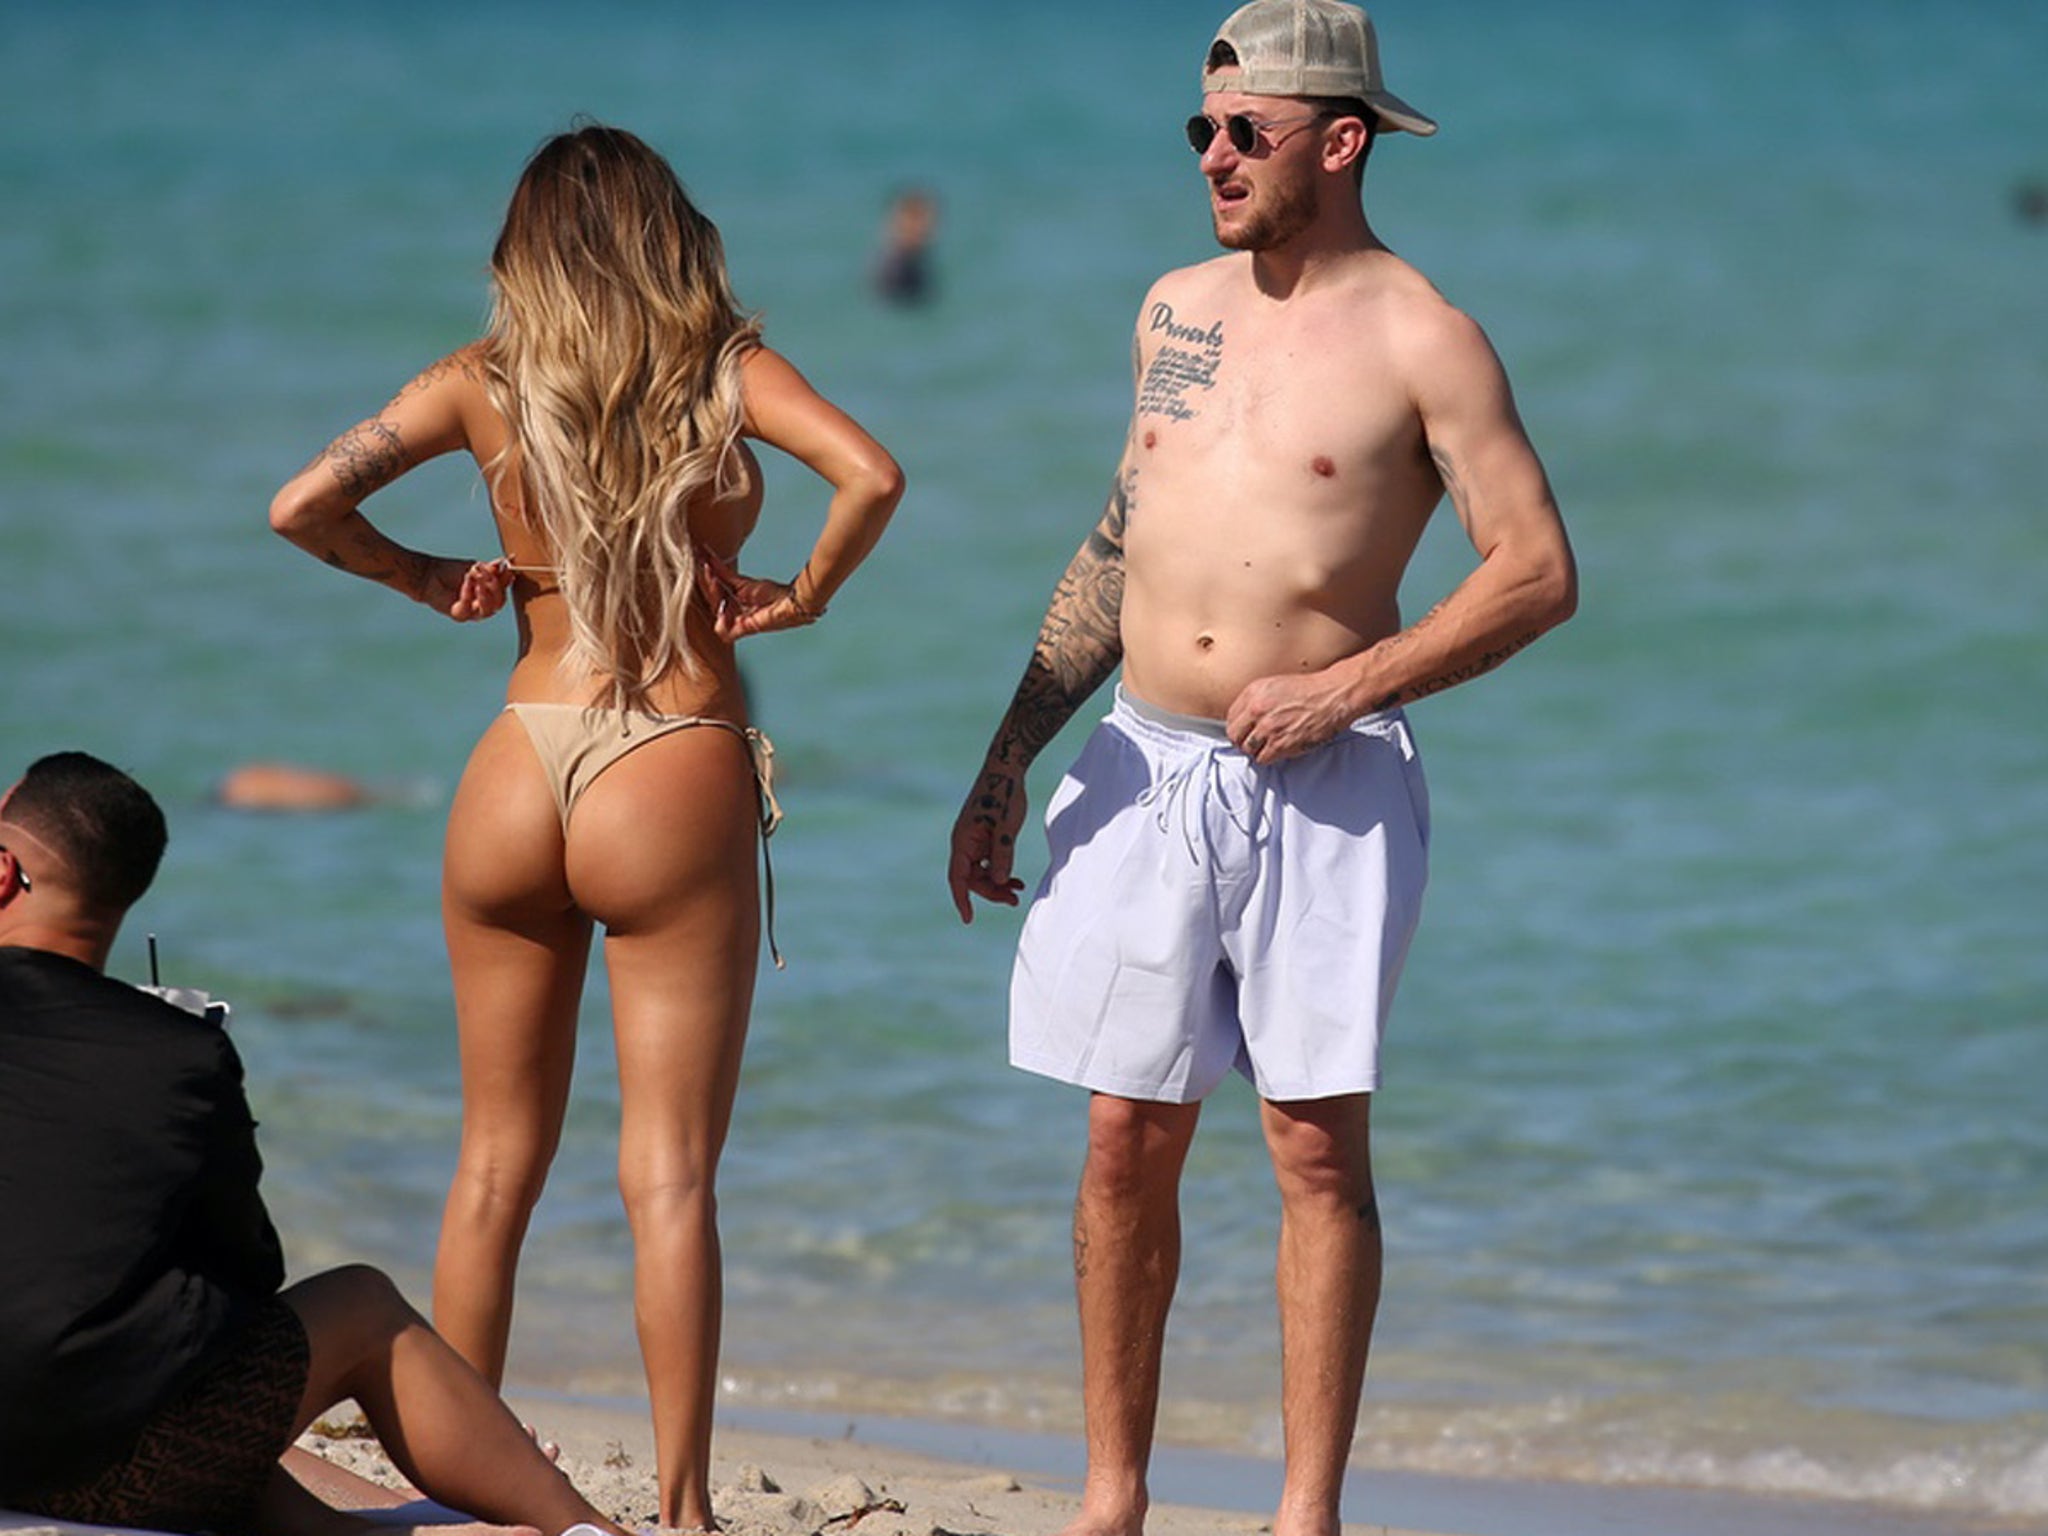 Johnny Manziel Hangs With Bikini Model, Throws Football After Announcing Comeback